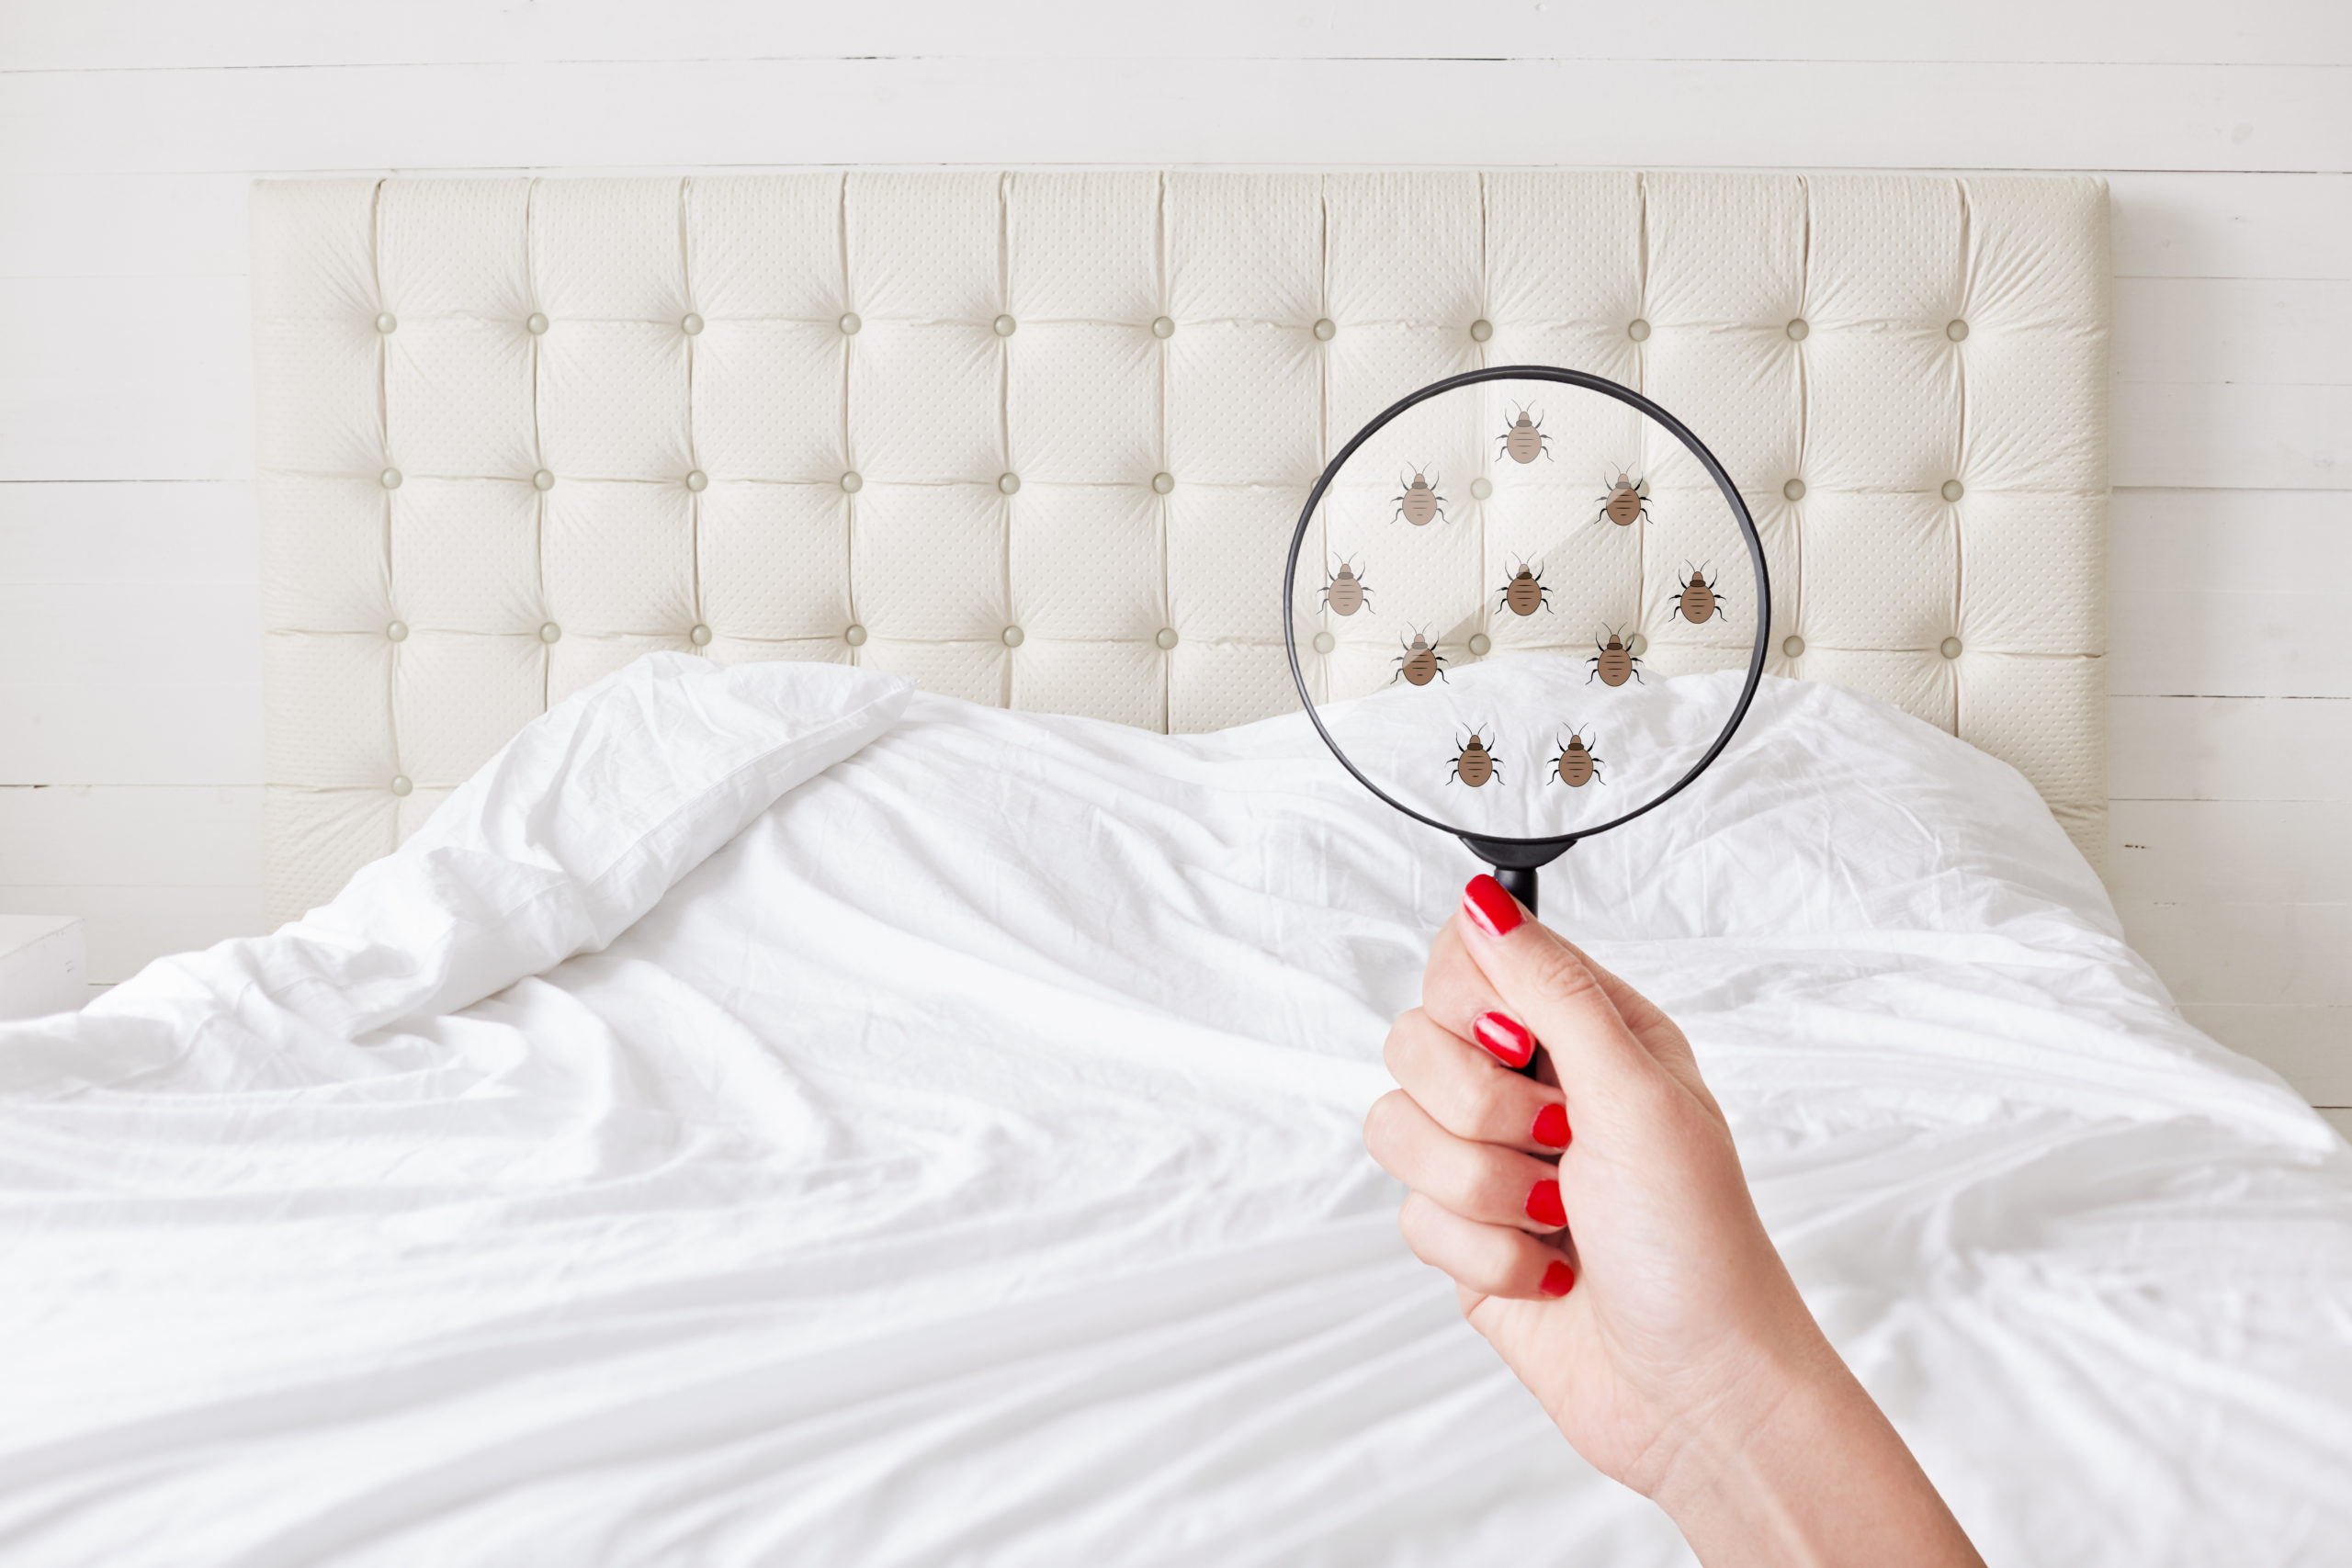 Woman Holds Lens, Shows There Are Bugs in Bedclothes